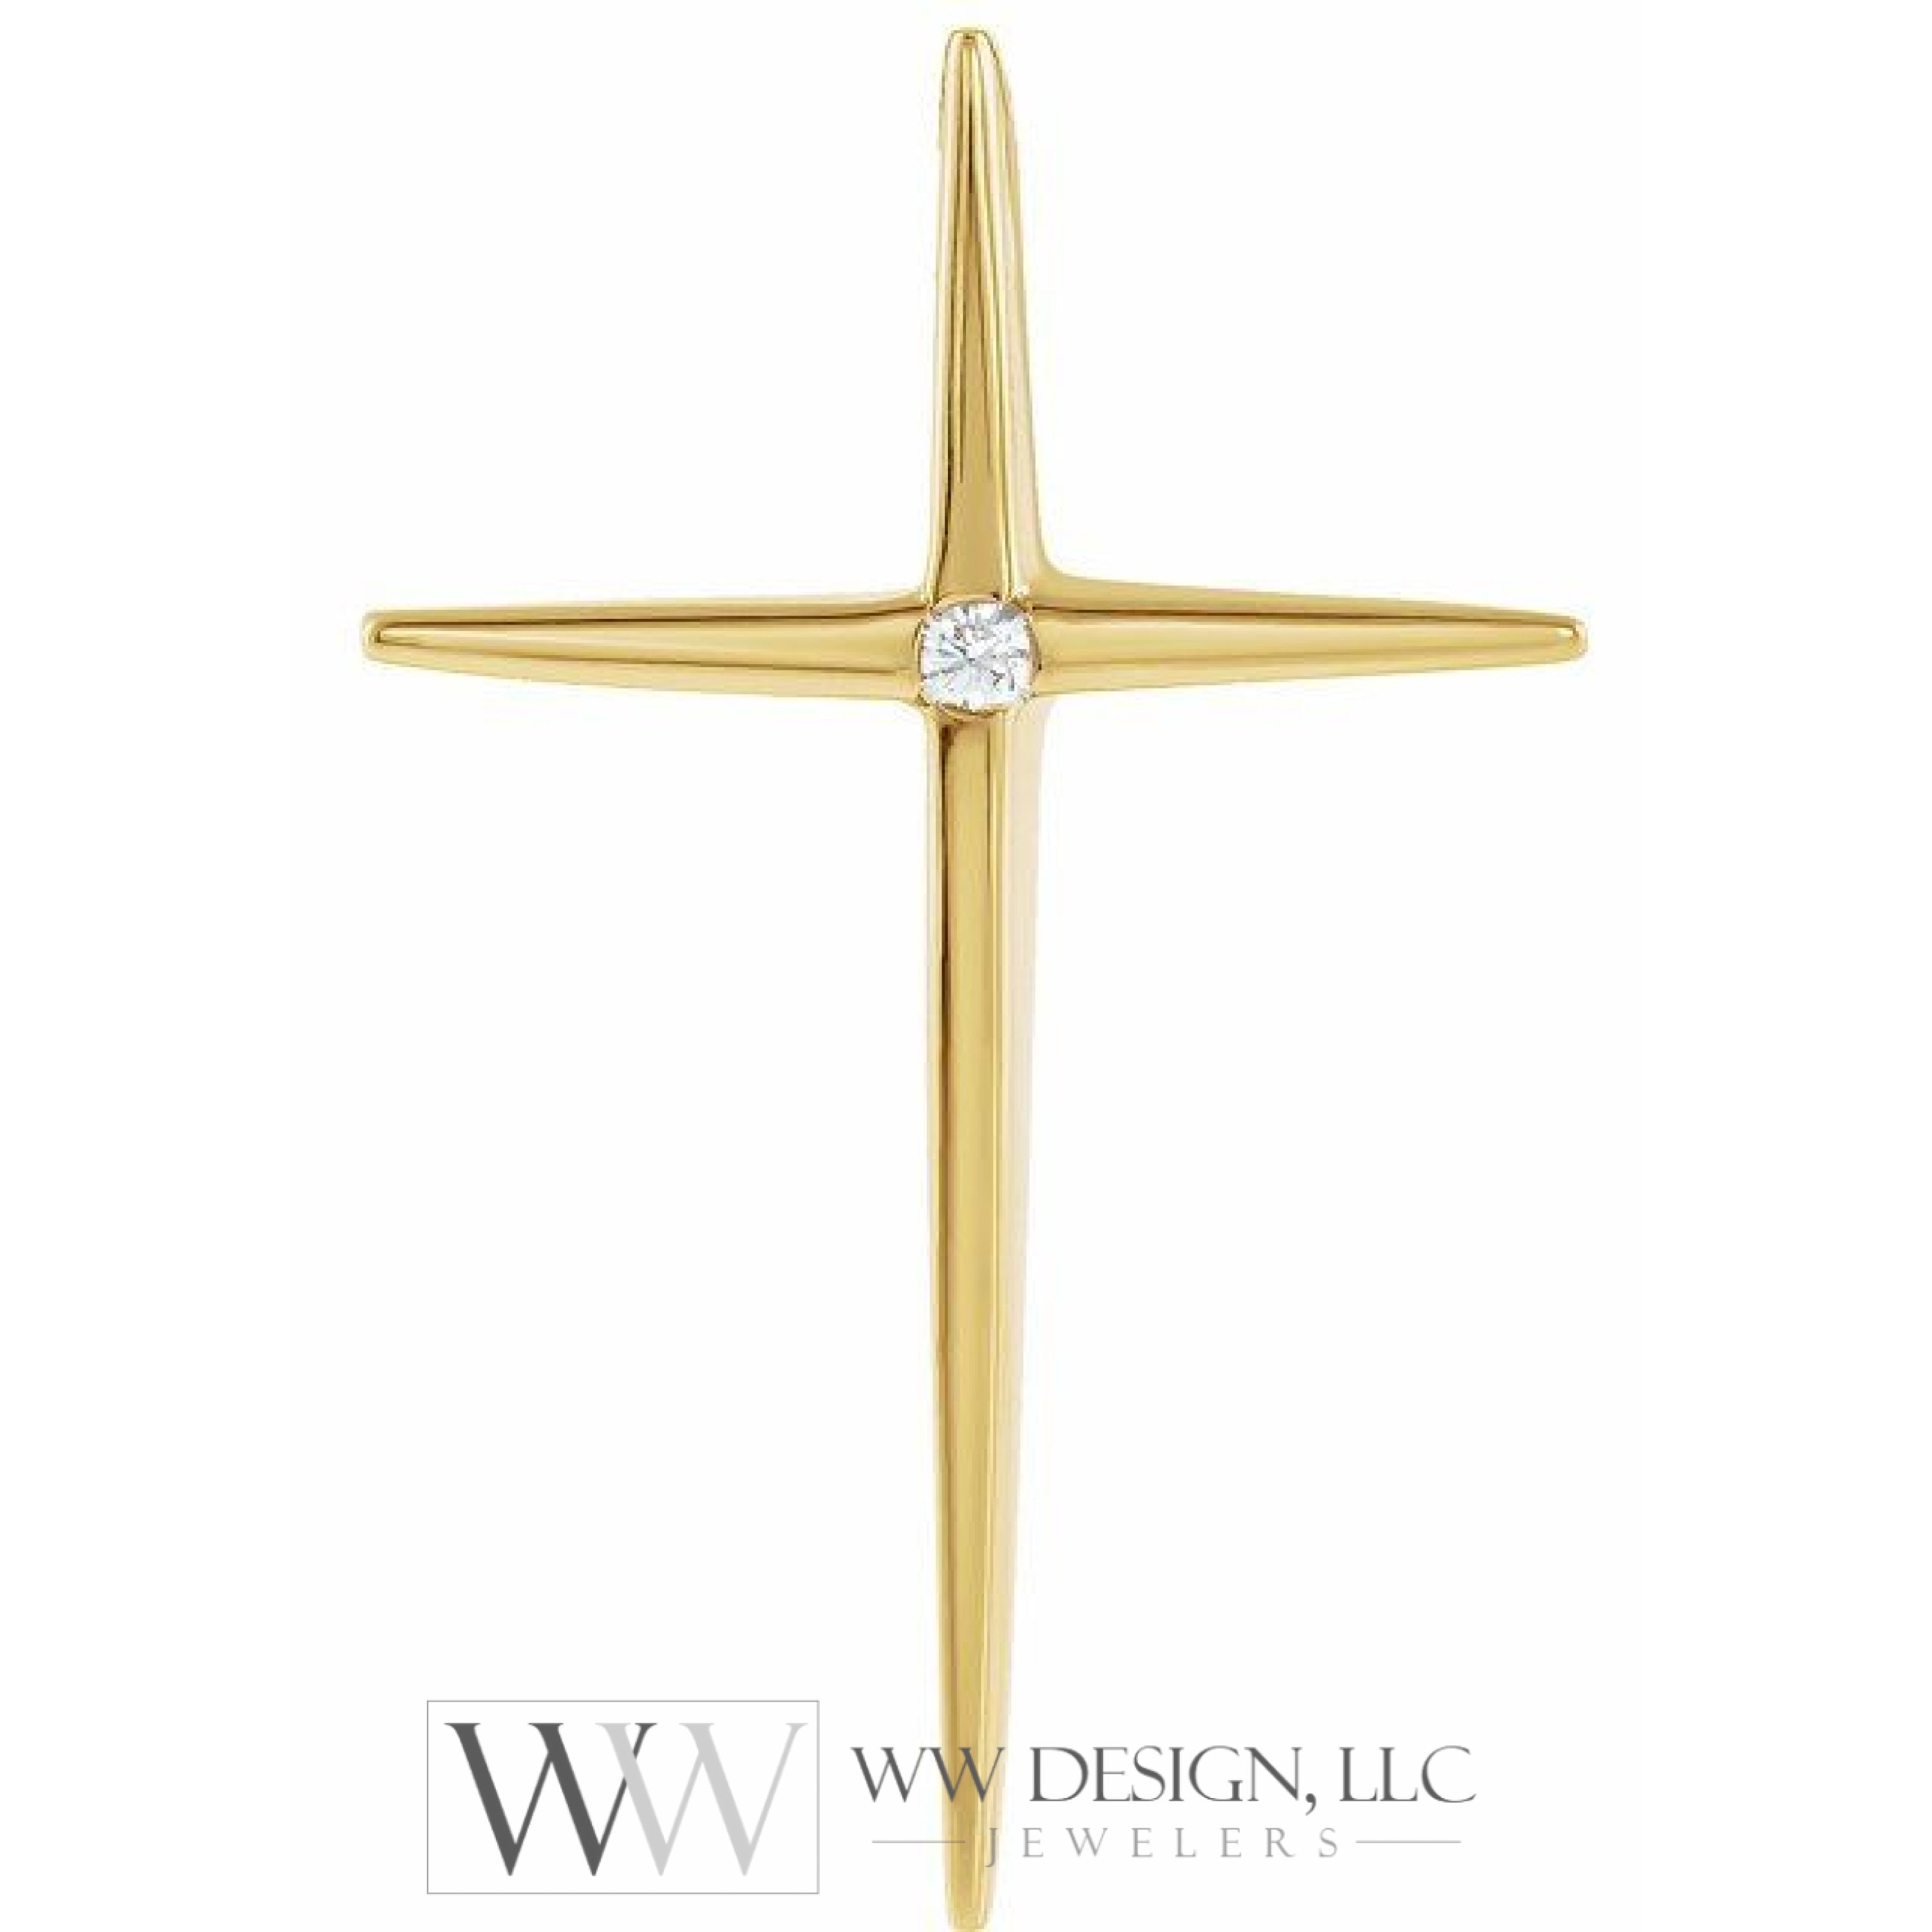 0.03 Ct Long Skinny Cross Pendant Necklace with Natural Diamond Center 28x18mm - 14K Solid Yellow Gold